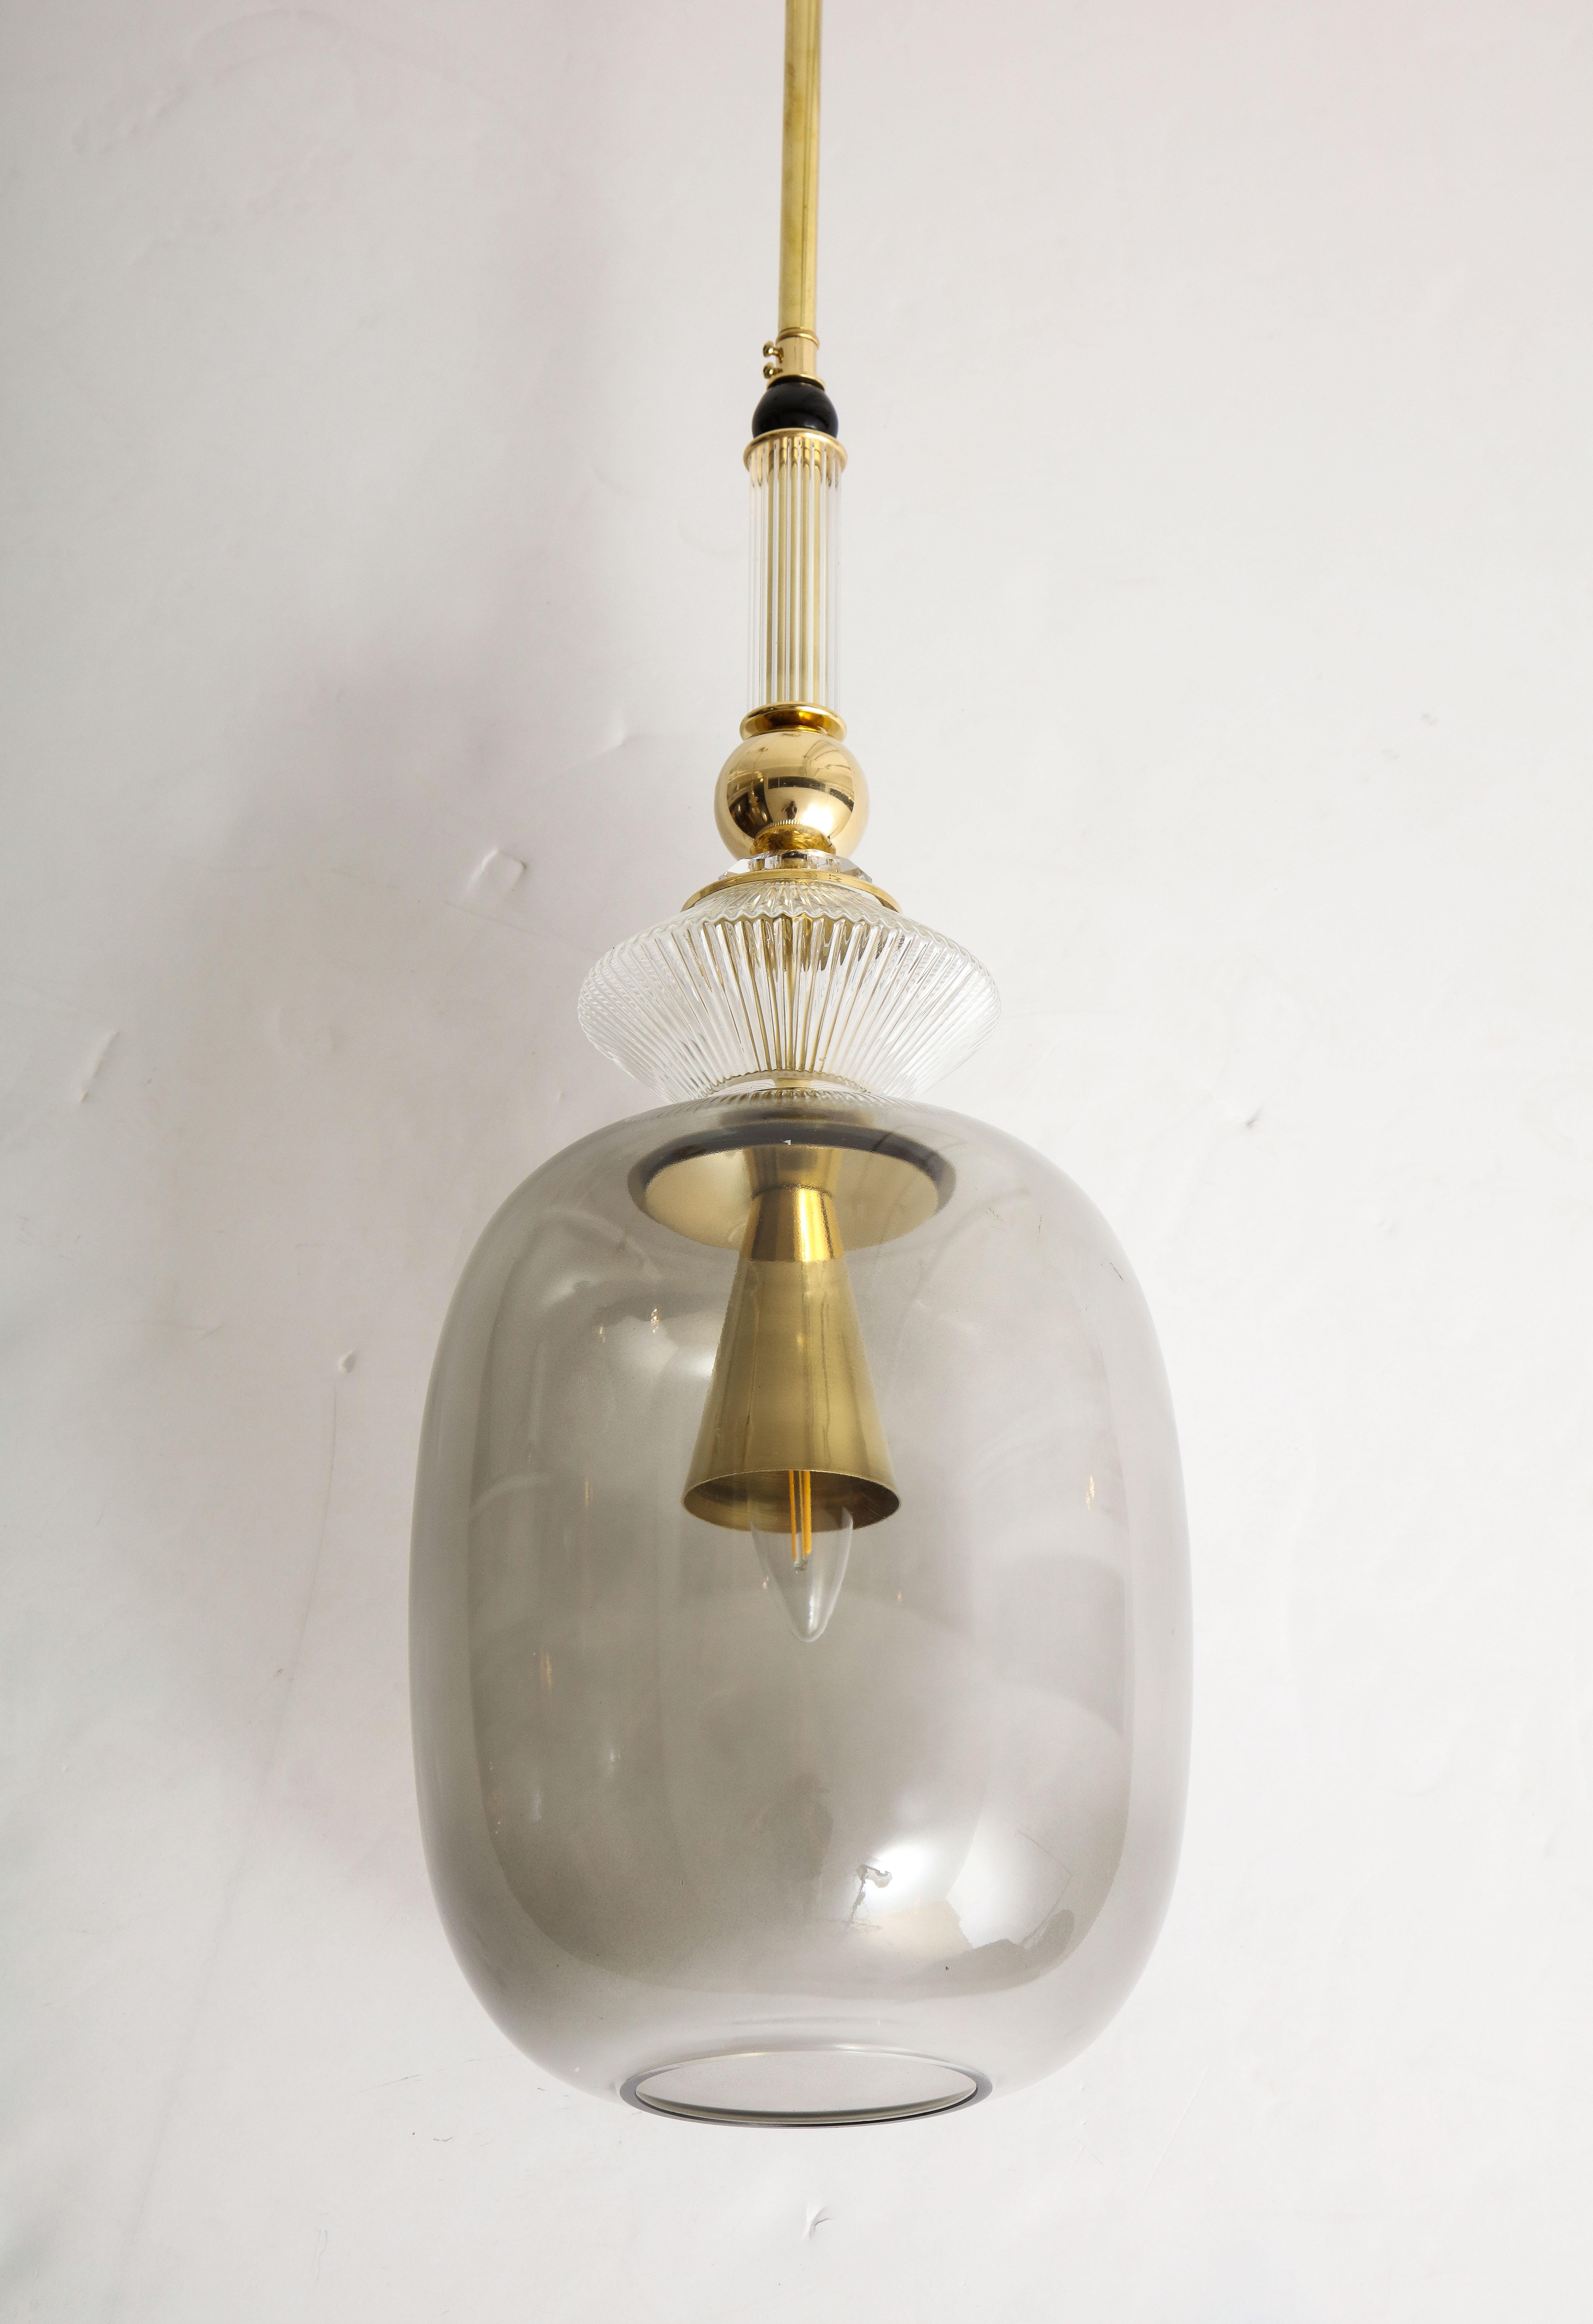 One of a kind pair of Murano glass and brass pendants, handmade in Venice, Italy. A smoked grey taupe Murano glass globe forms the base of this pendant with multiple Murano clear and textured glass elements and brass balls stacked above it. A